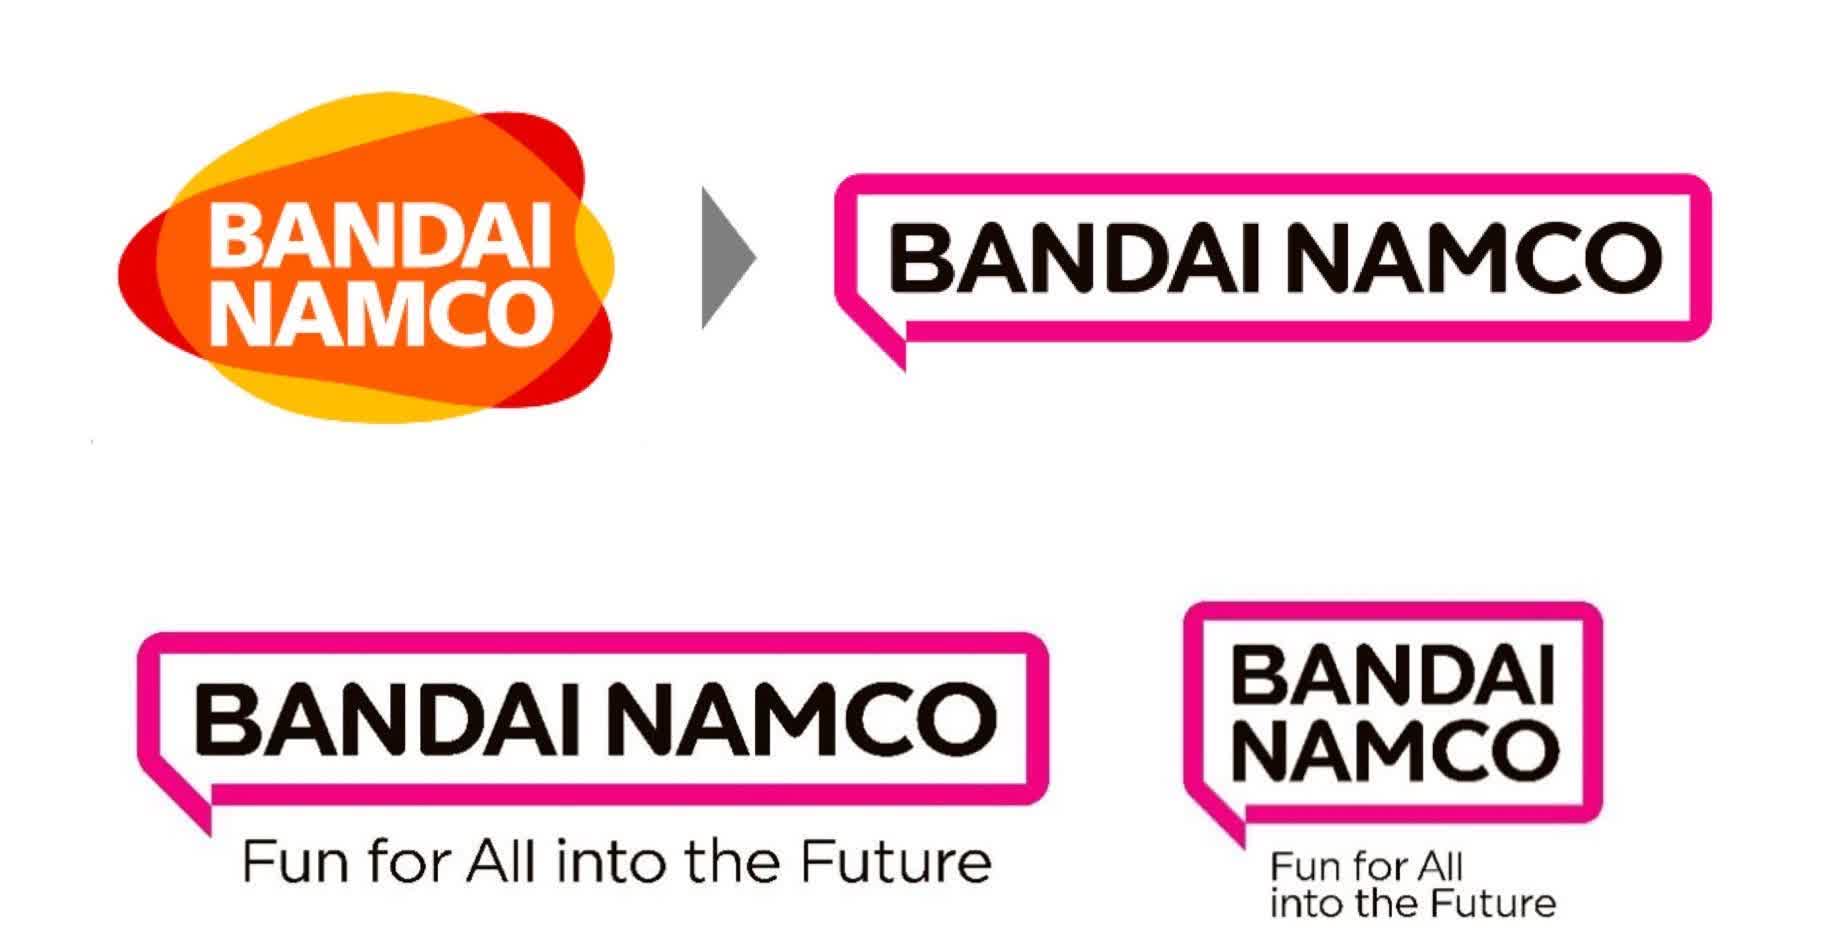 Bandai Namco is rebranding itself next year; fans don't care for